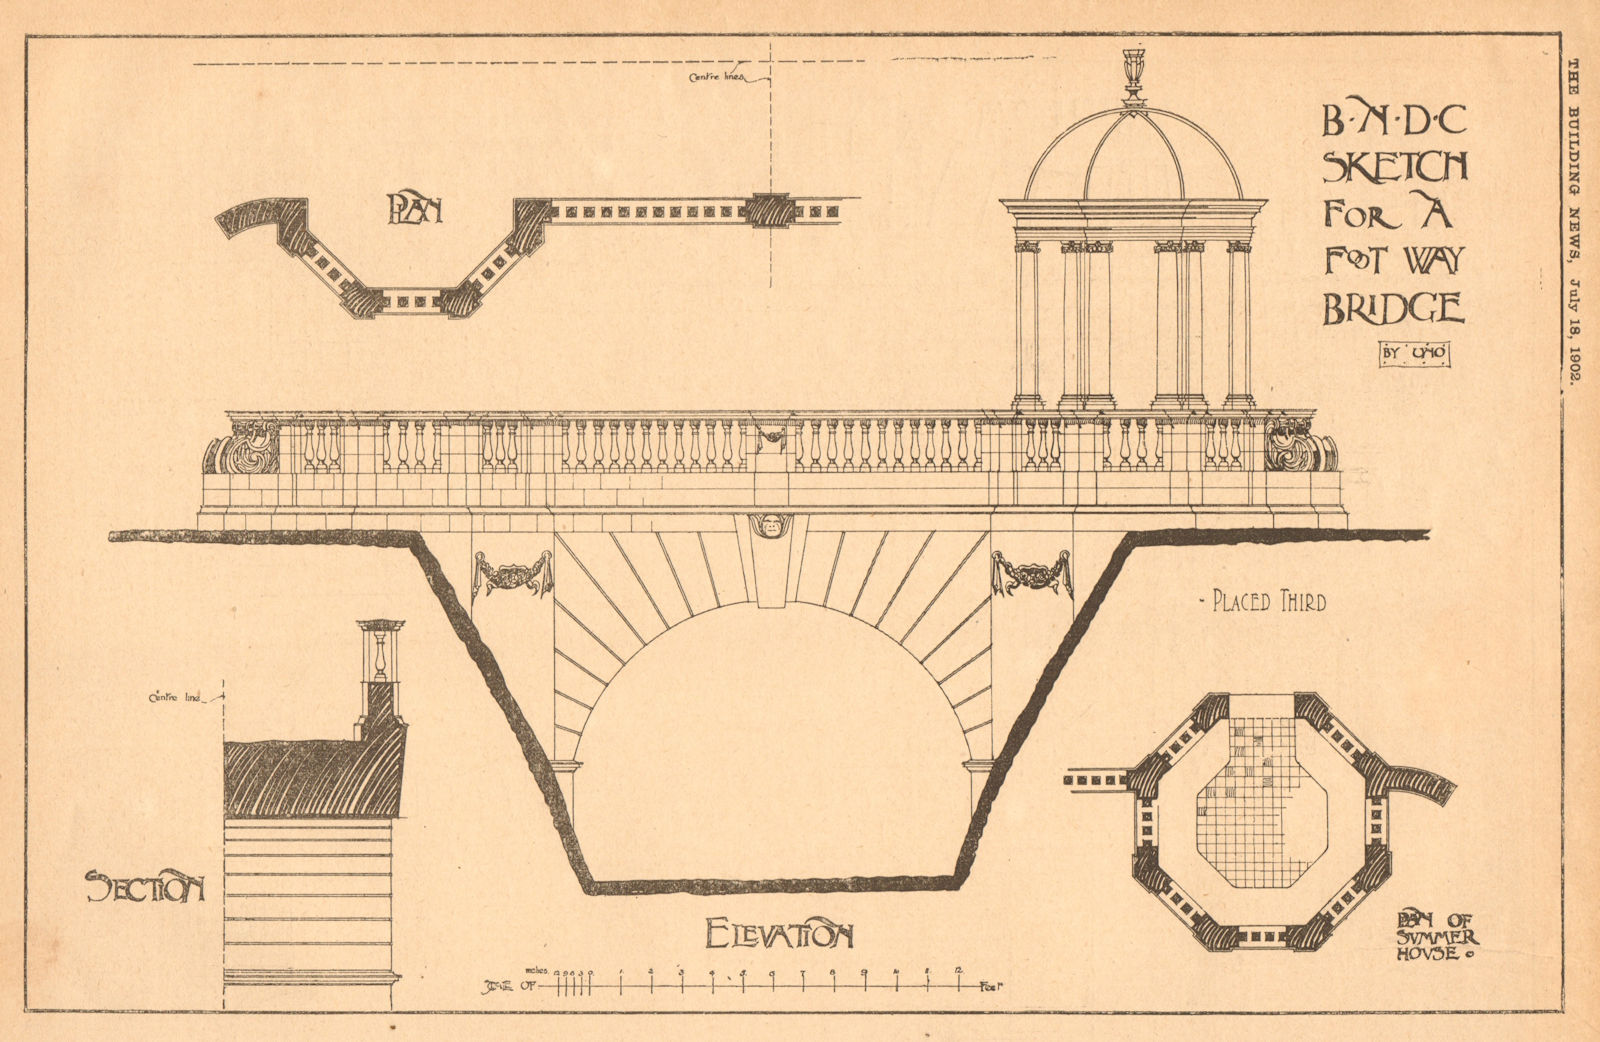 Associate Product B.N.D.C Sketch for a foot way bridge by Uno. Summer house elevation & plans 1902